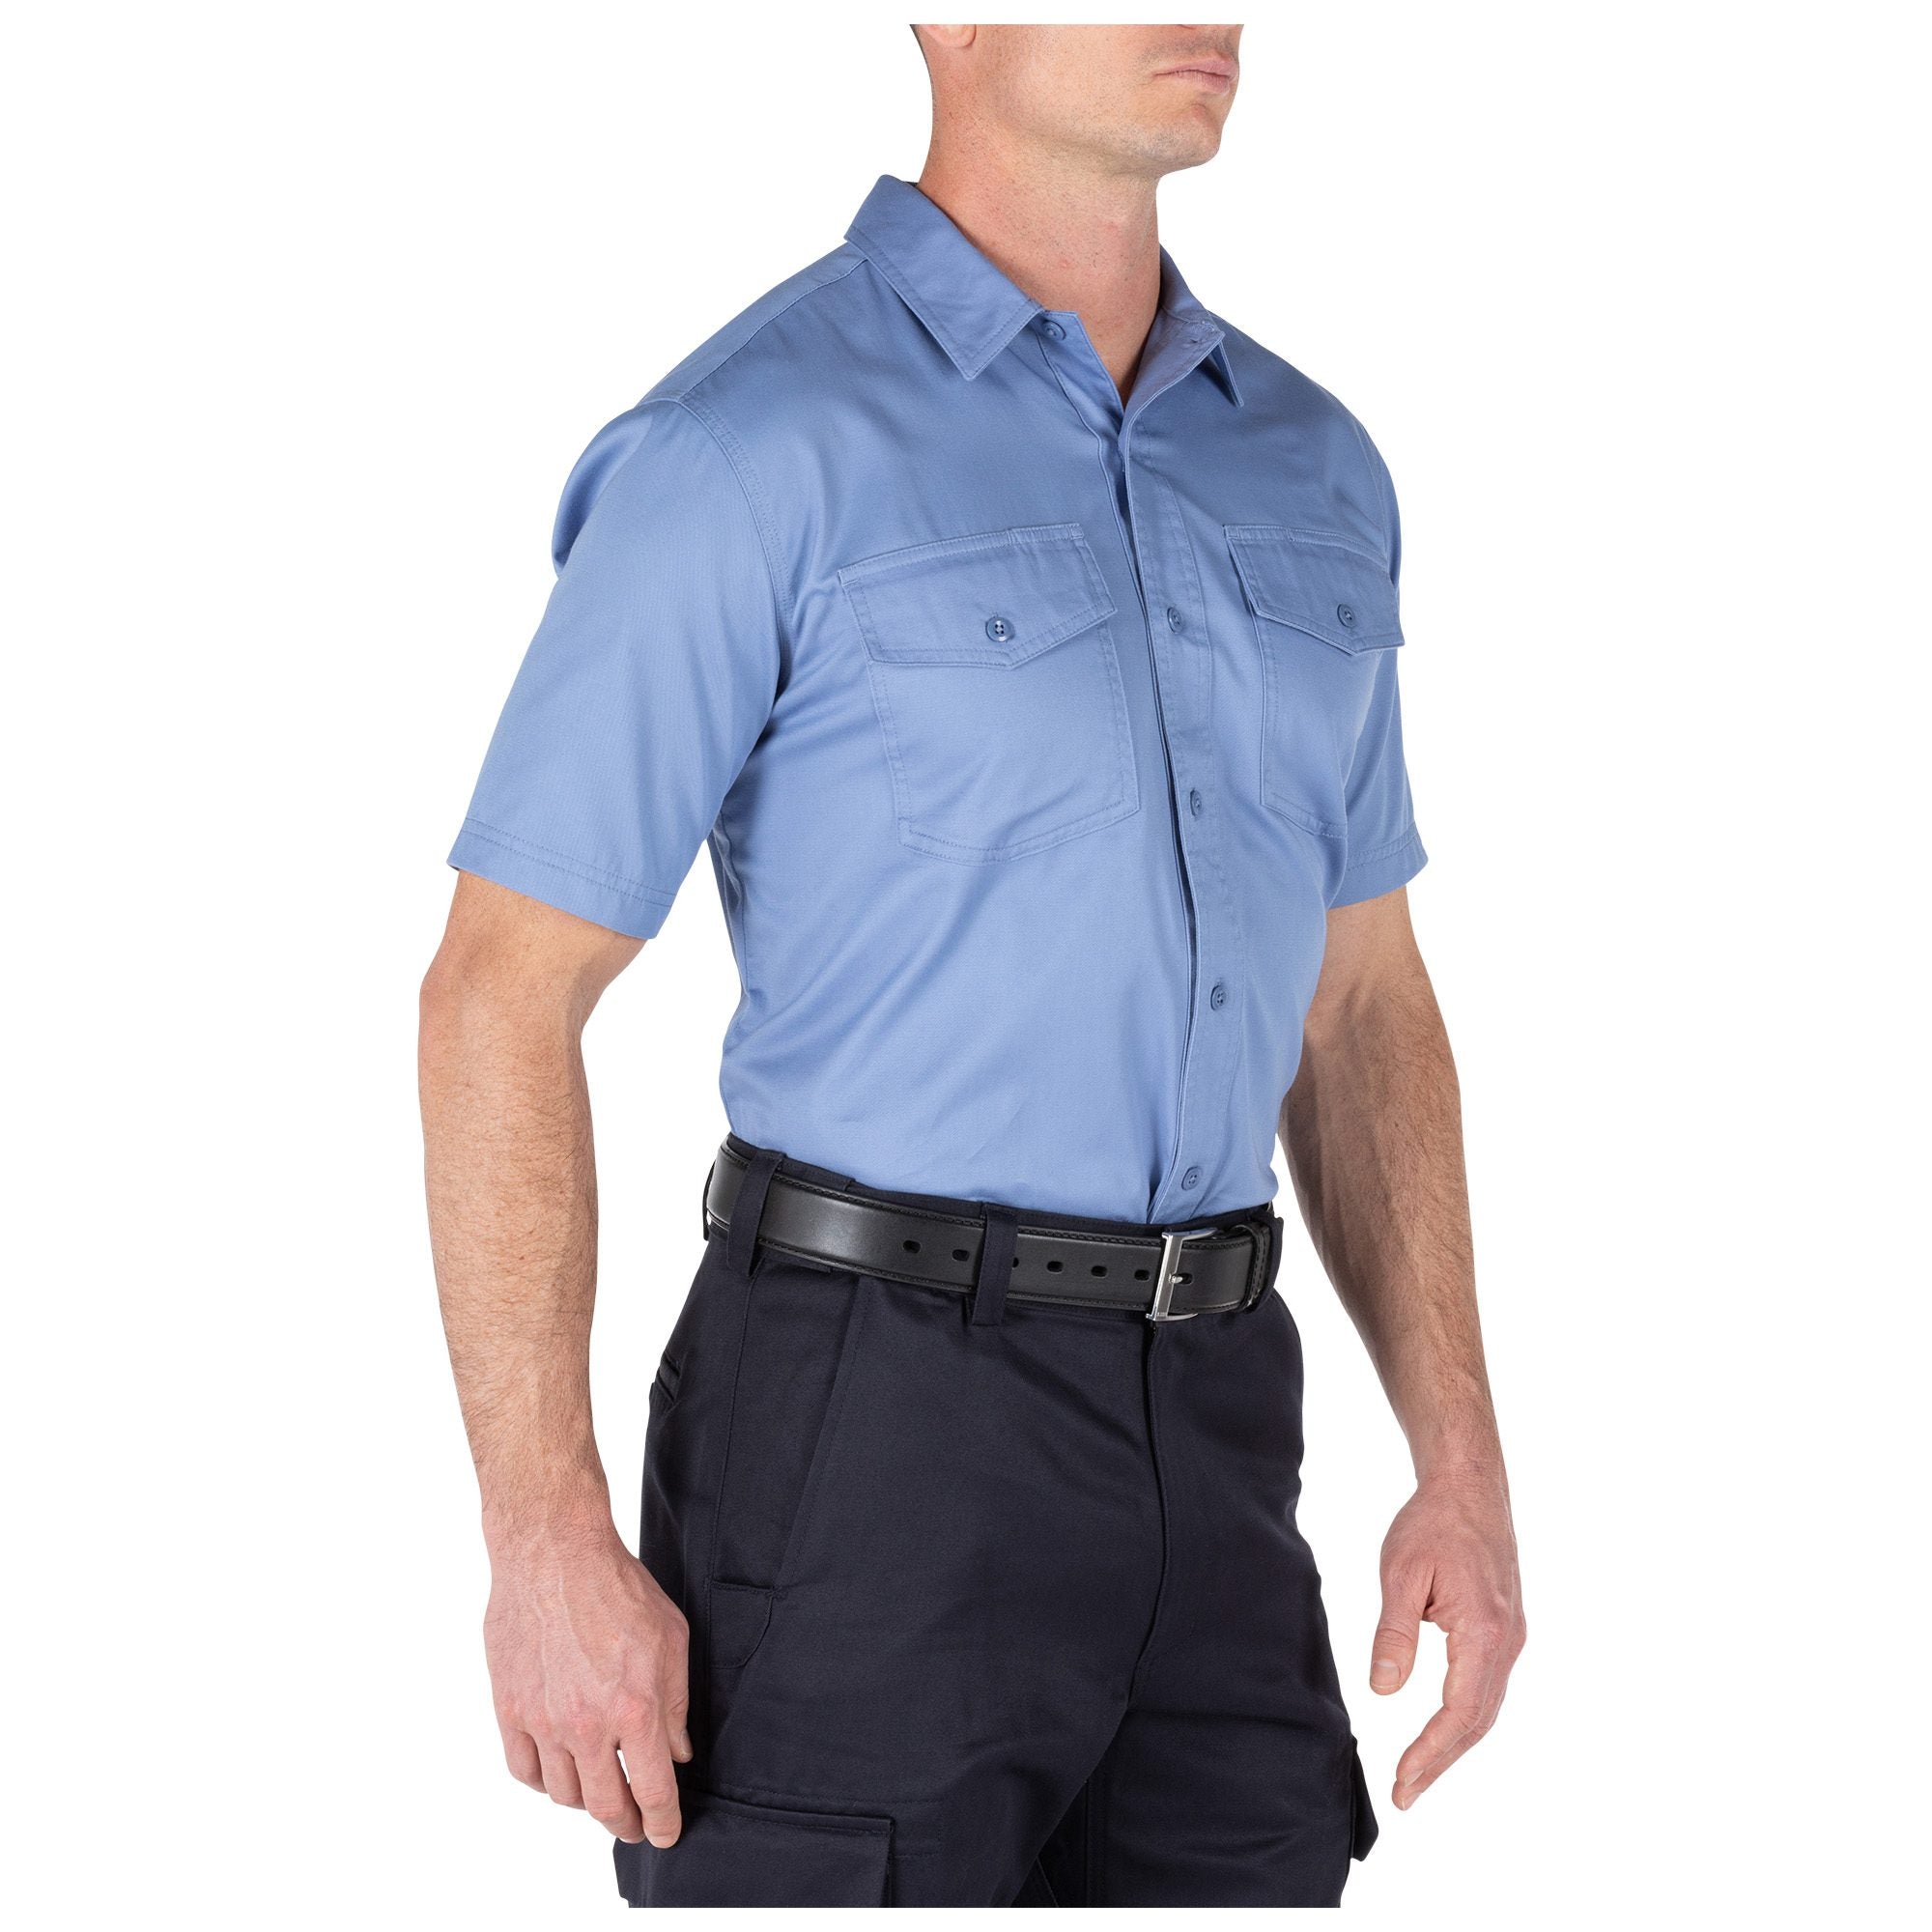 5.11 Tactical Company Shirt Short Sleeve 71391 - Clothing & Accessories